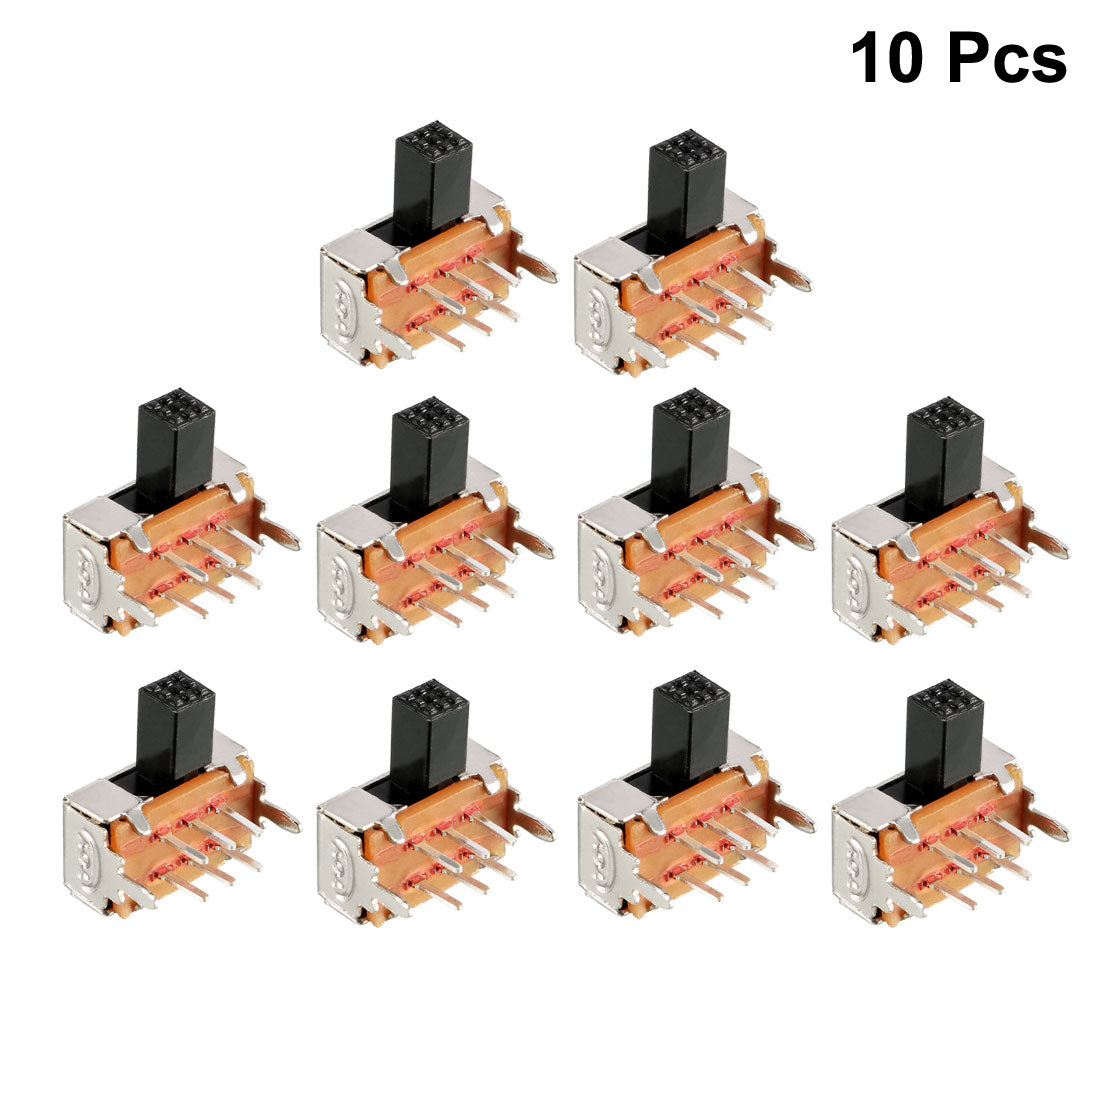 uxcell Uxcell 10Pcs 6mm Horizontal Slide Switch DPDT 2P2T 6 Terminals PCB Panel Latching